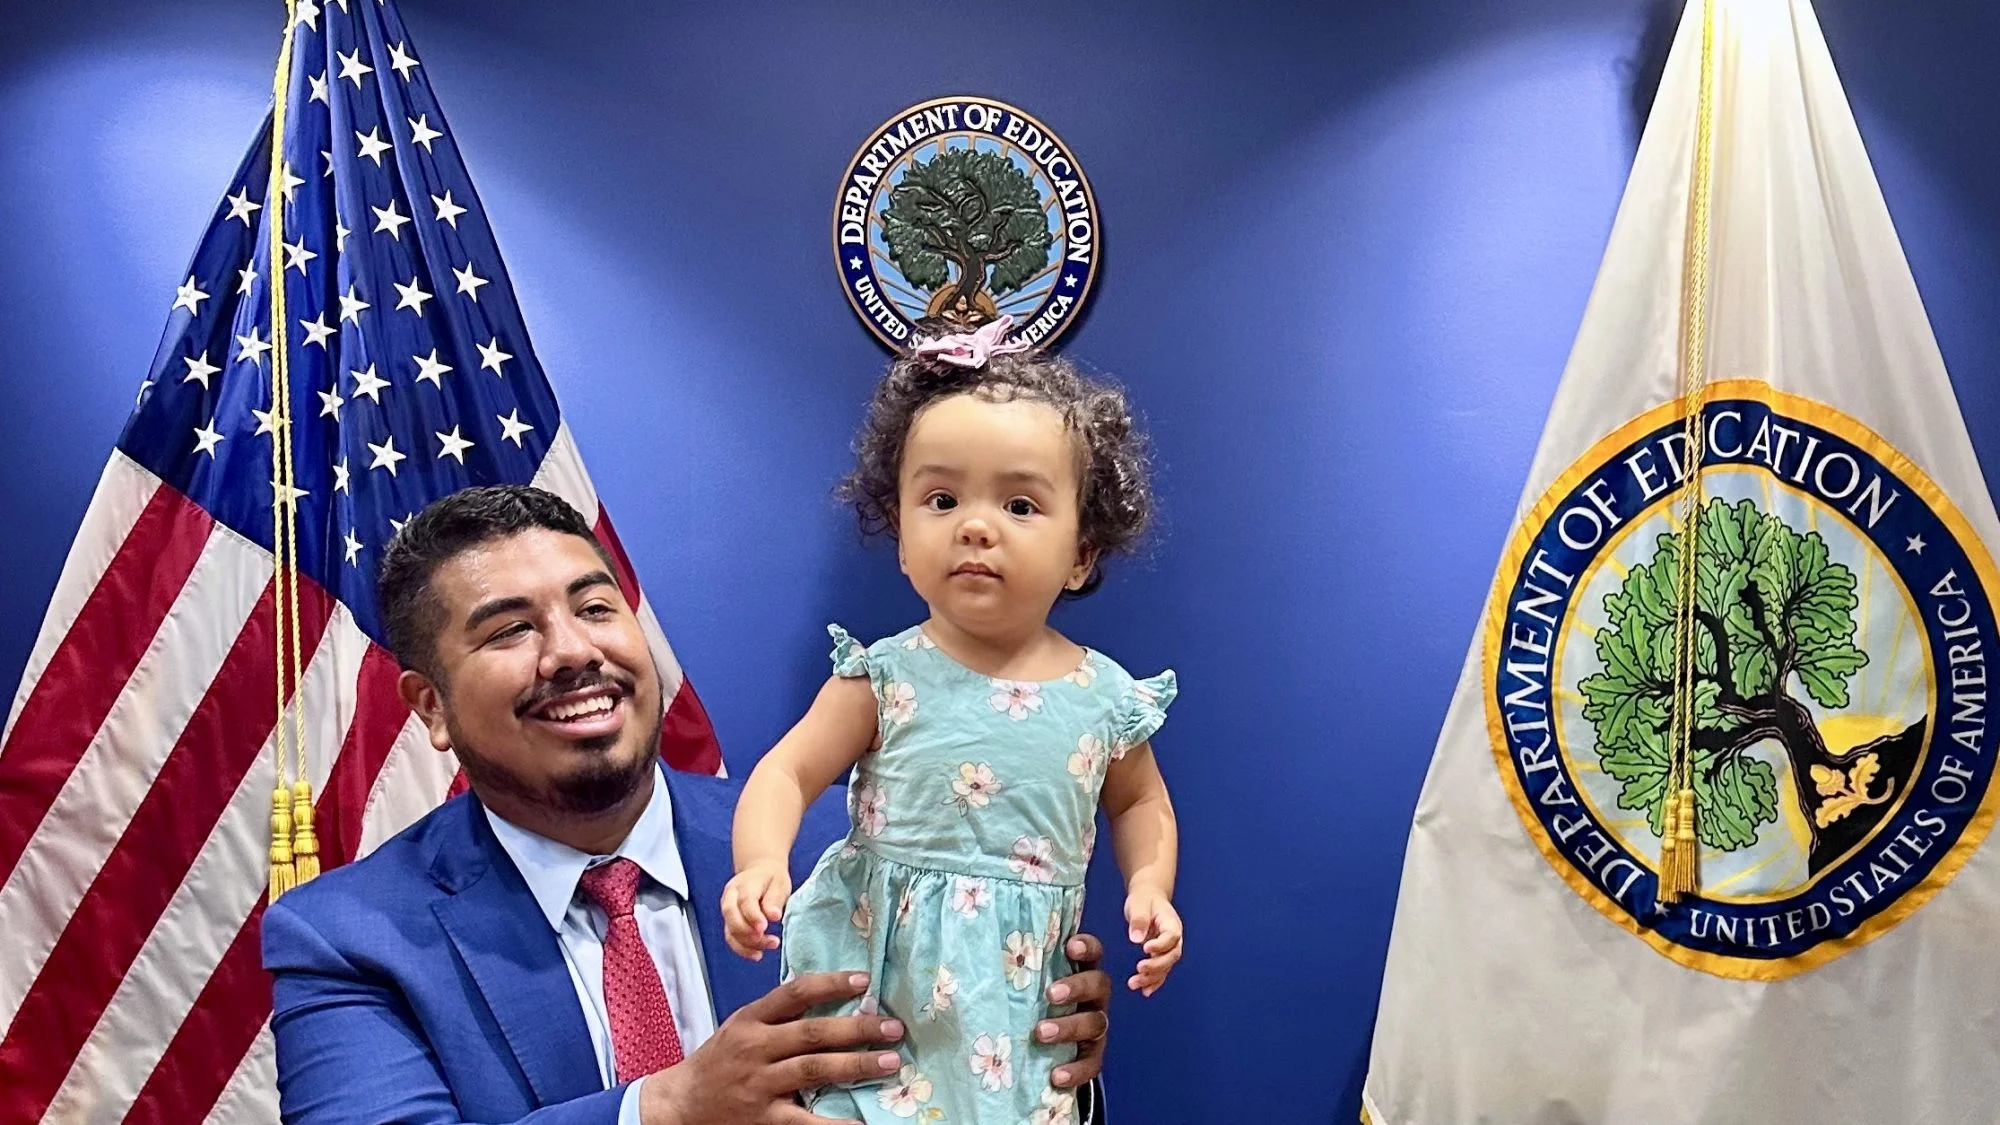 Adan Gonzalez (C'15) was holding his three-day-old daughter in front of the US and Dept. of Education flags